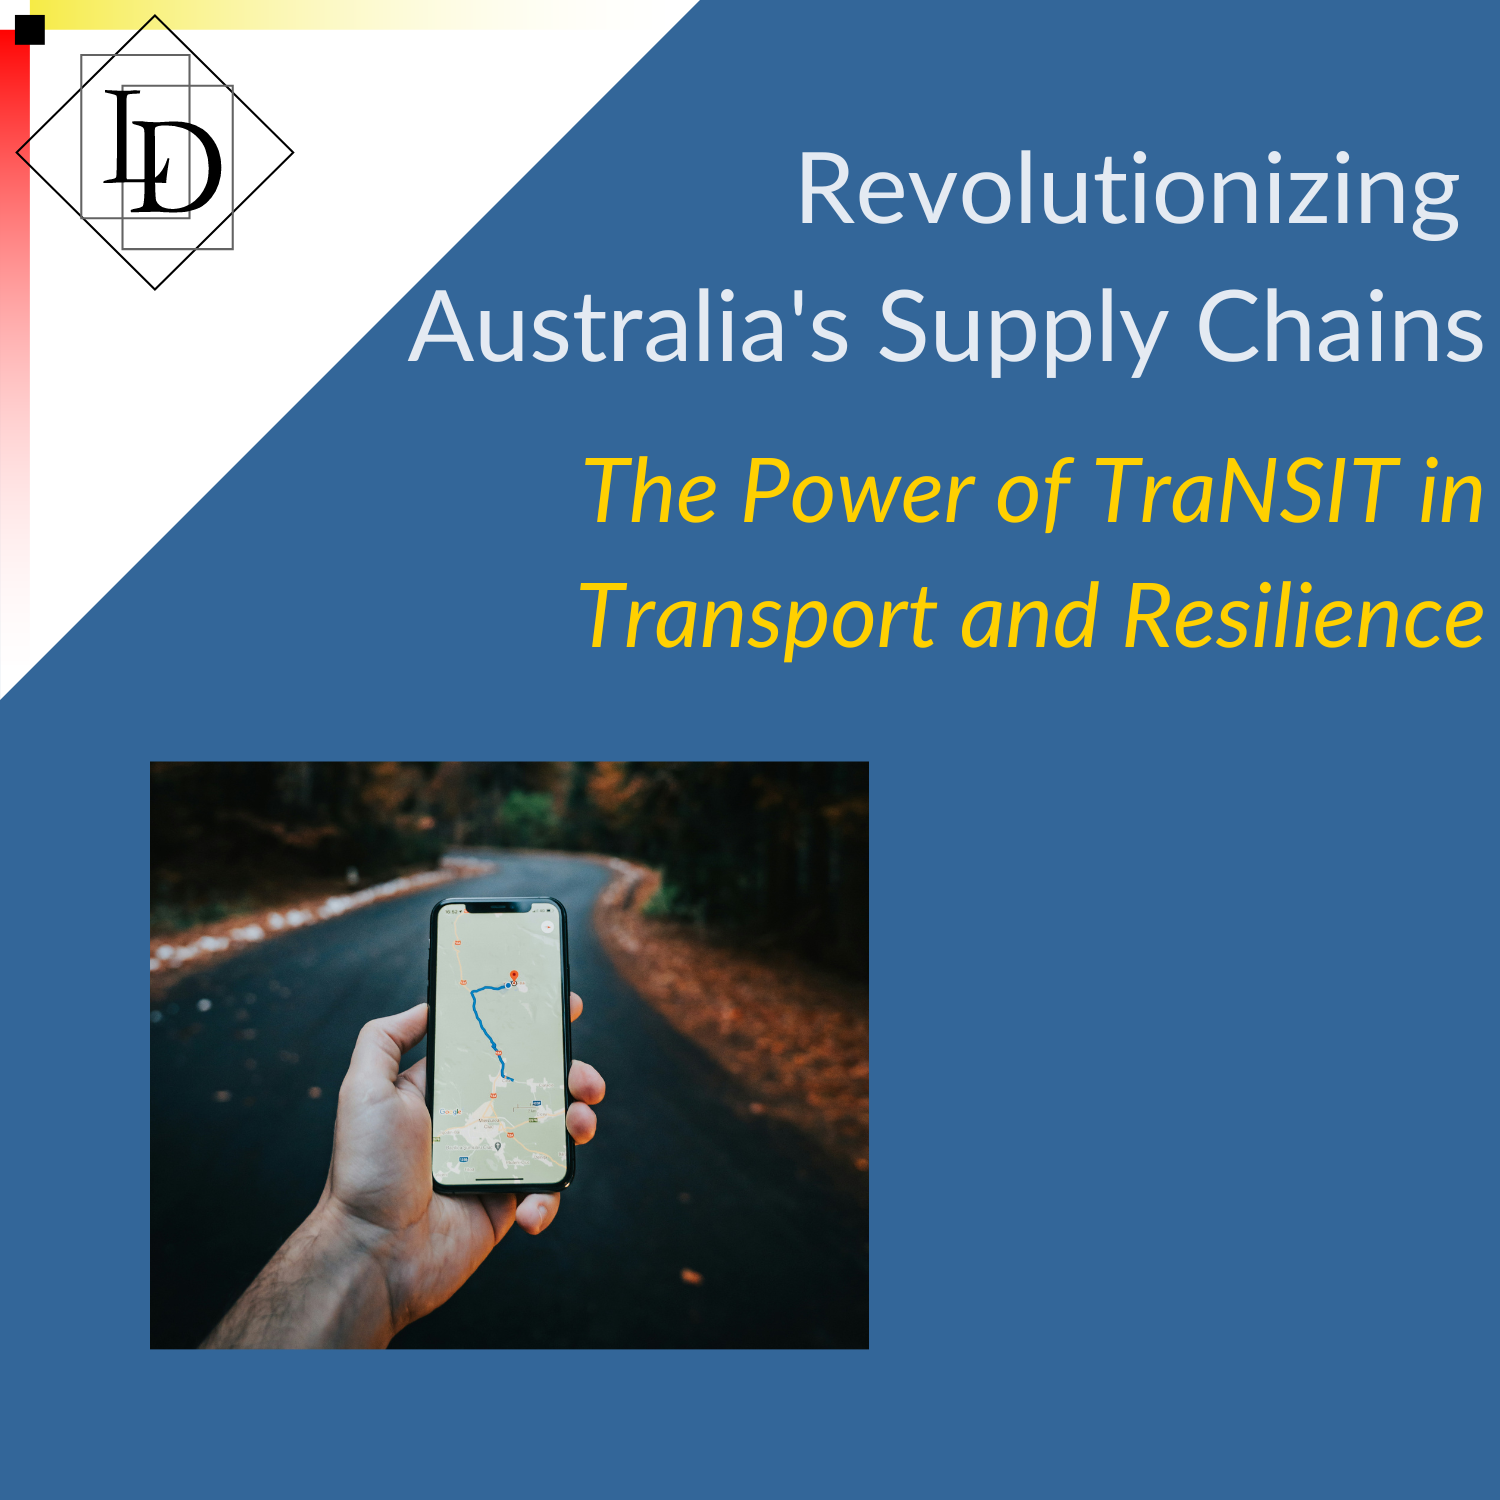 Title Revolutionizing Australia's Supply Chains: The Power of TraNSIT in Transport and Resilience, picture of winding country road, a hand holding a mobile phone showing a map route.